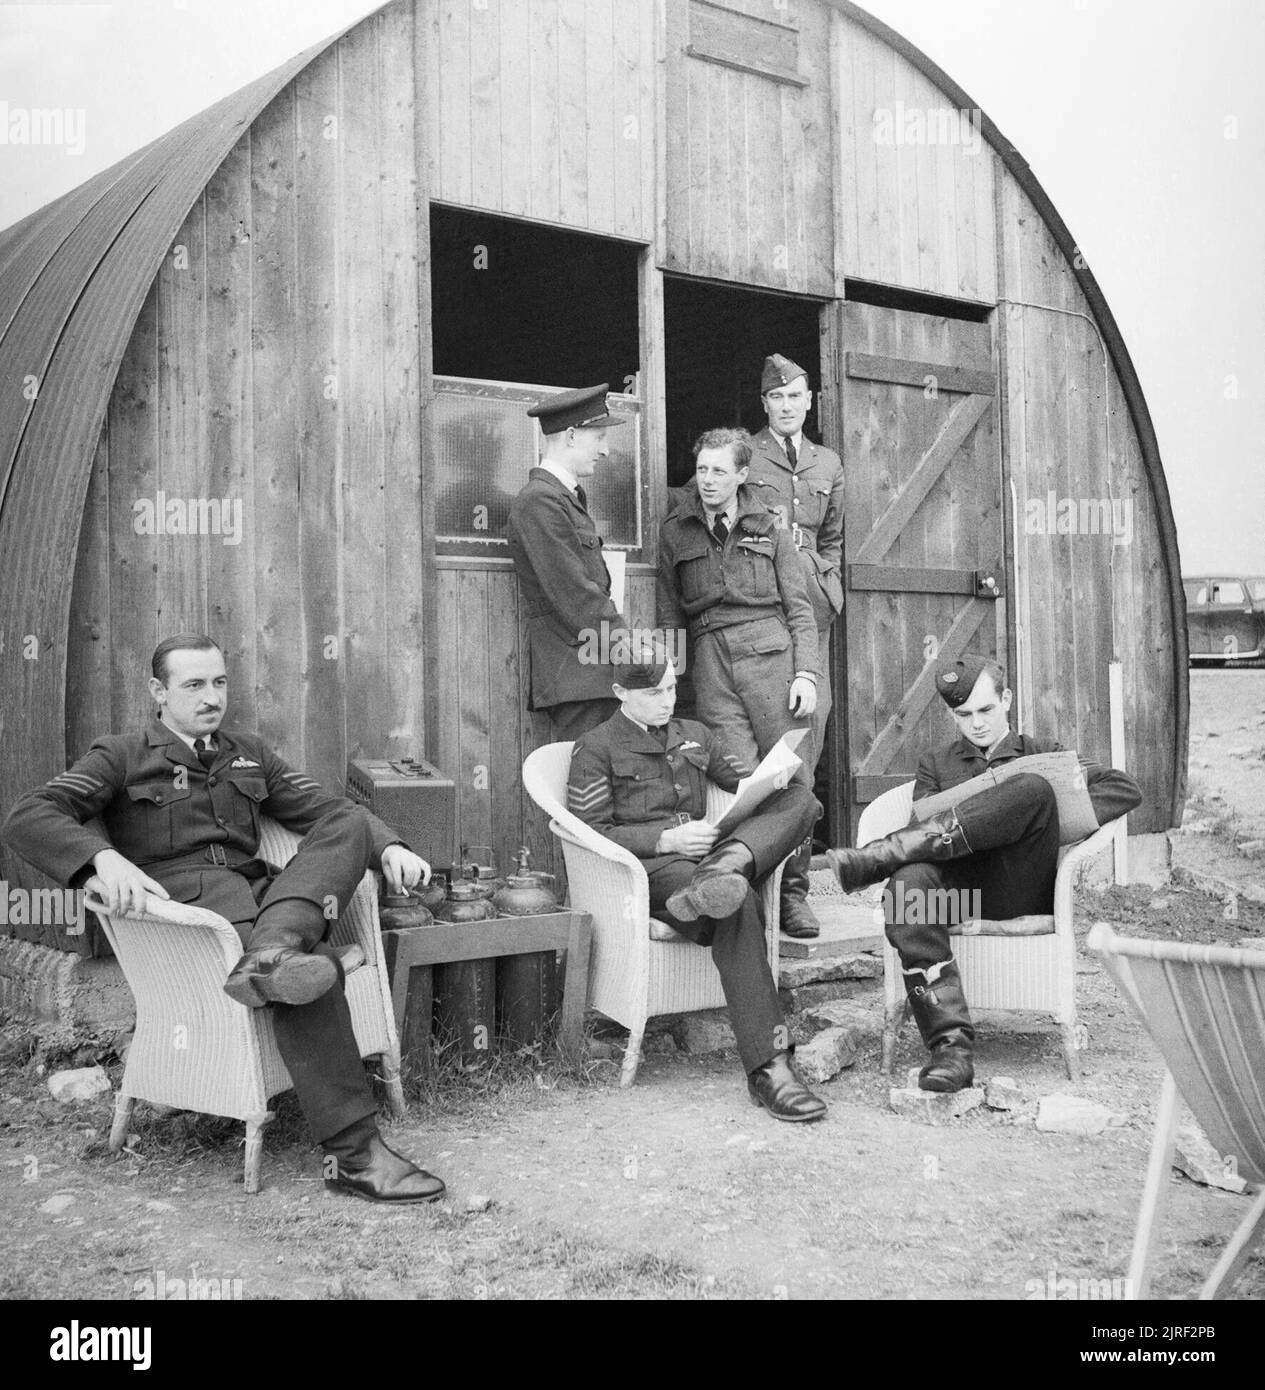 Australian pilots of No. 452 Squadron relax outside their dispersal hut at Kirton-in-Lindsey, 18 June 1941. Australian pilots of No. 452 Squadron relax outside their dispersal hut at Kirton-in-Lindsey, 18 June 1941. Stock Photo